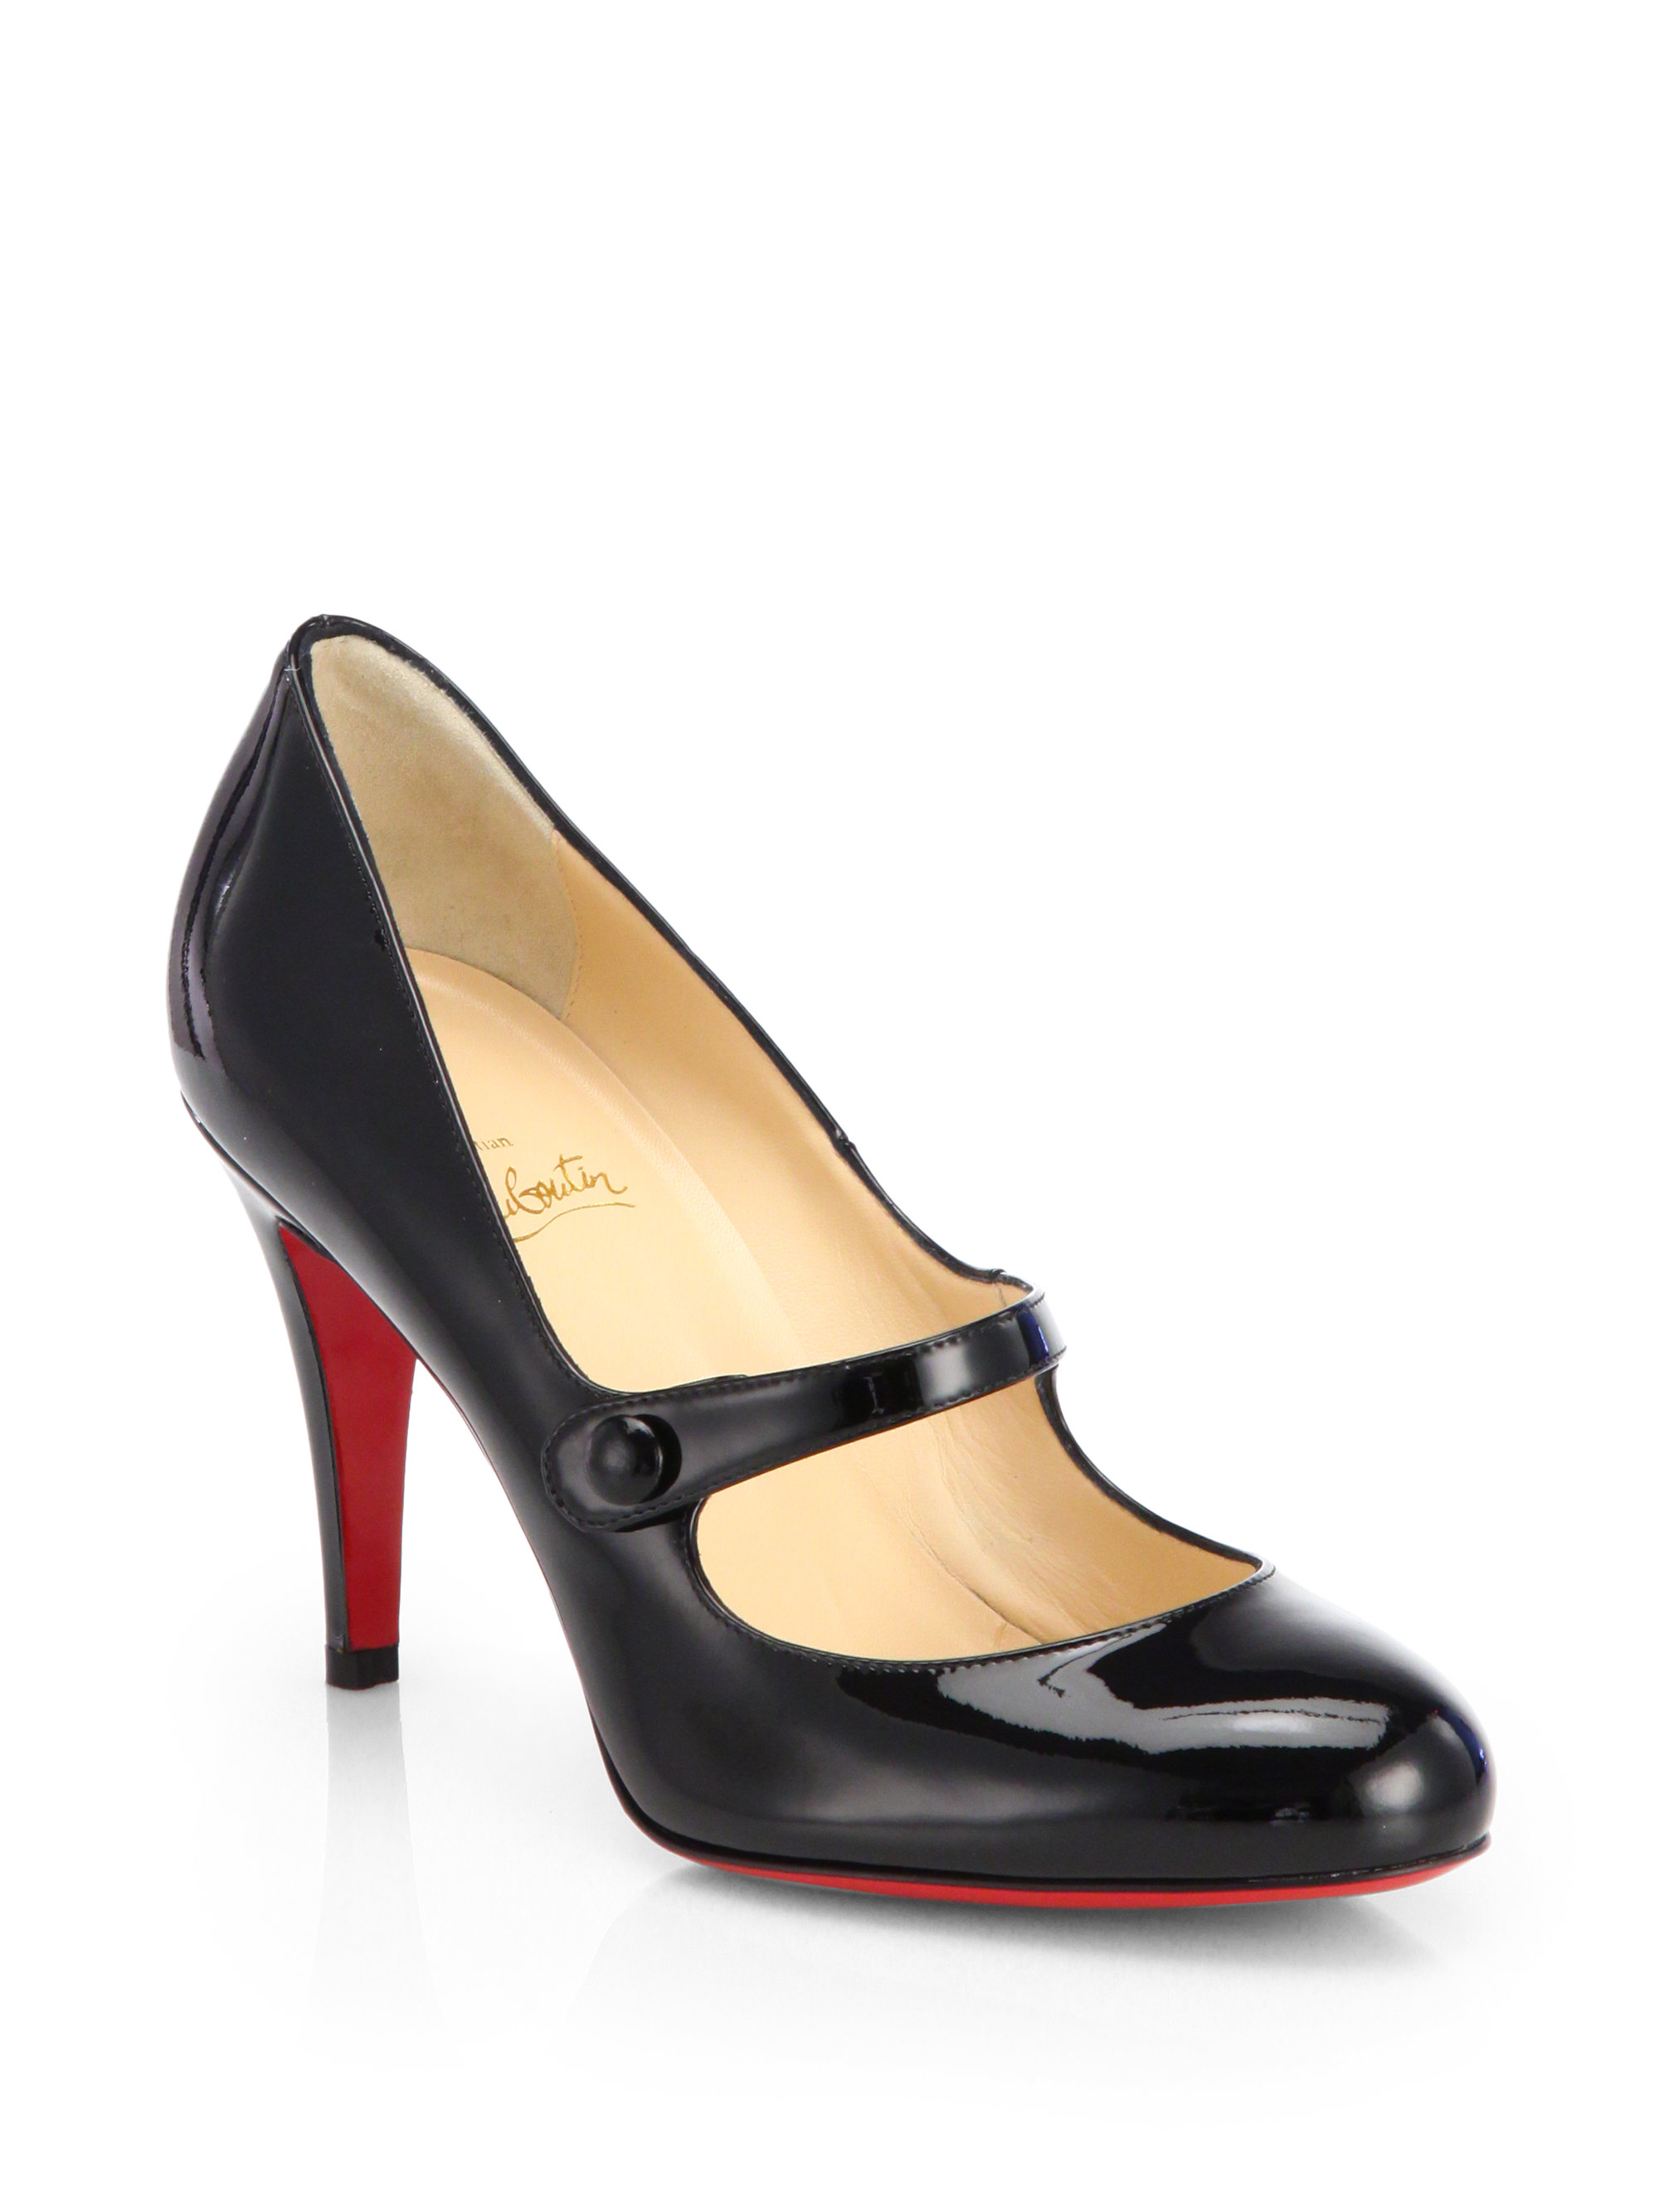 Christian Louboutin Charlene Patent Leather Mary Jane in Black - Lyst